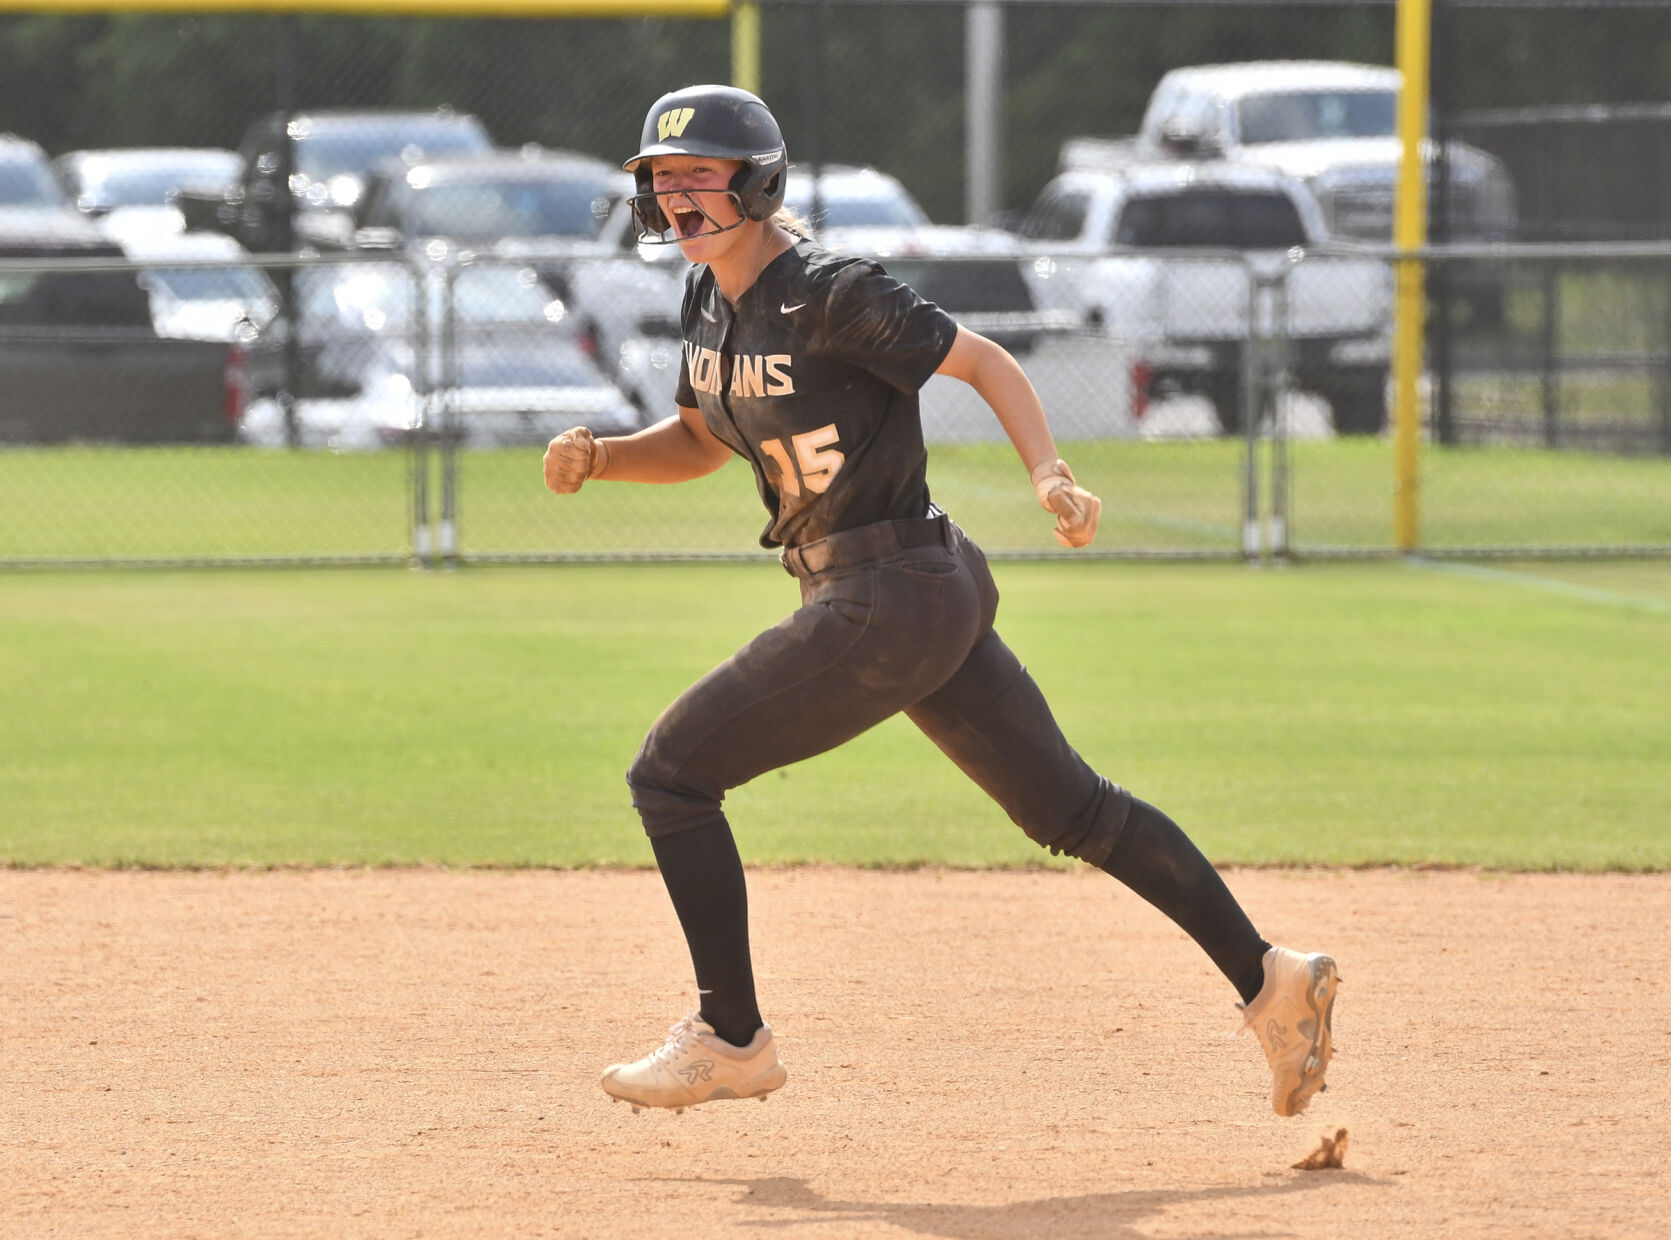 Ella Watson’s Outstanding Defensive and Offensive Performance Leads Wetumpka to Victory